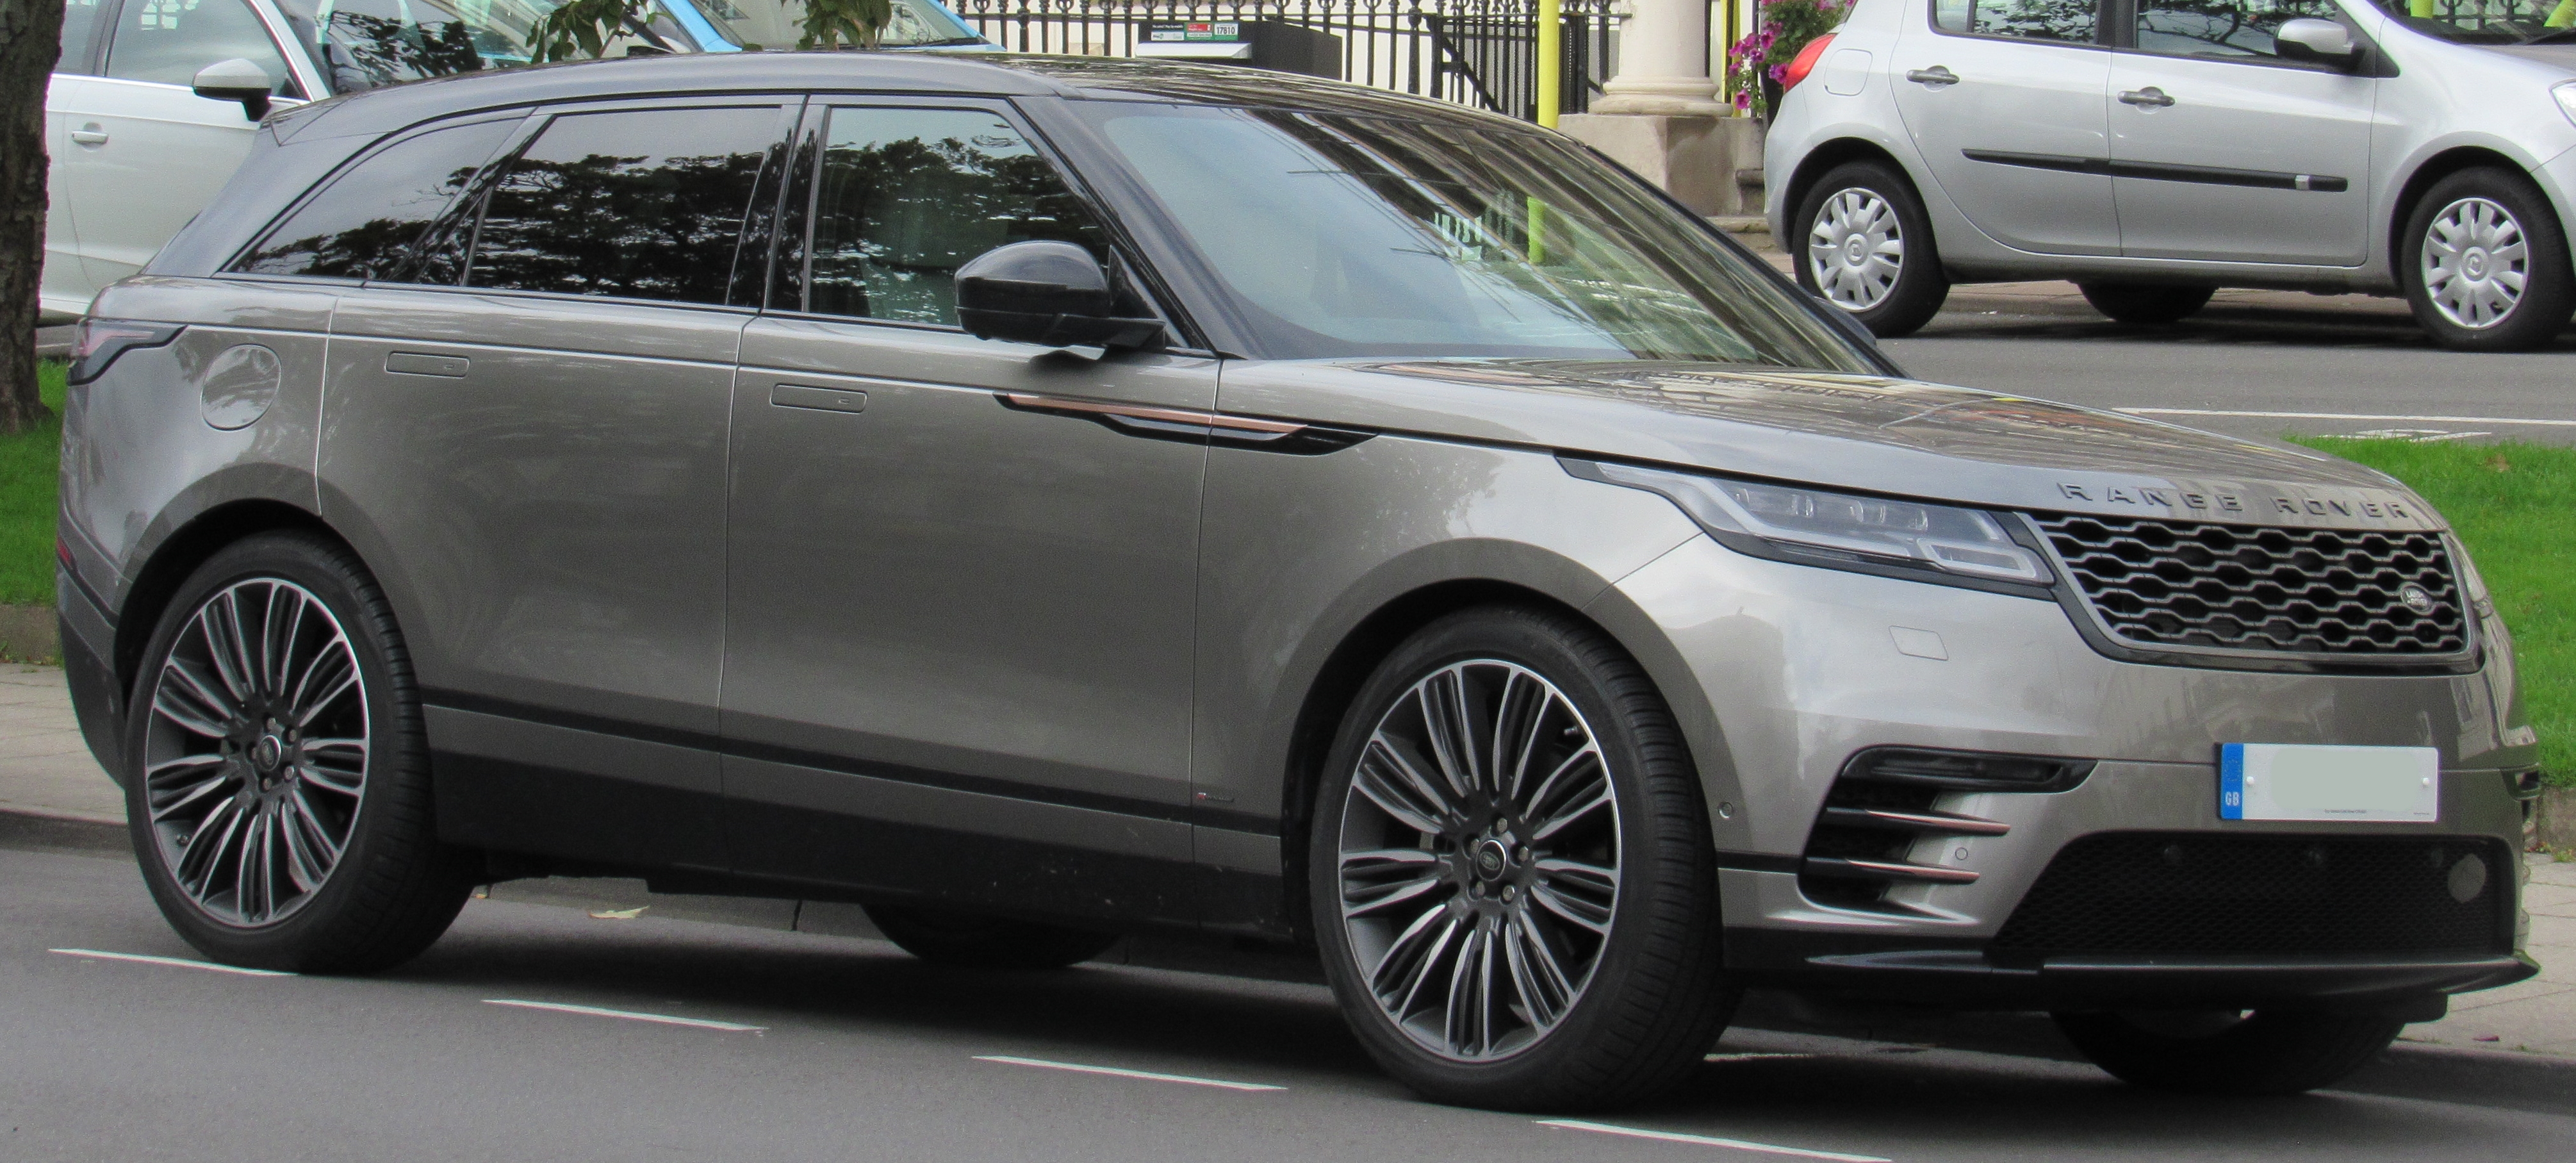 File:2017 Land Rover Range Rover Velar First Edition D3 3.0 Front ...